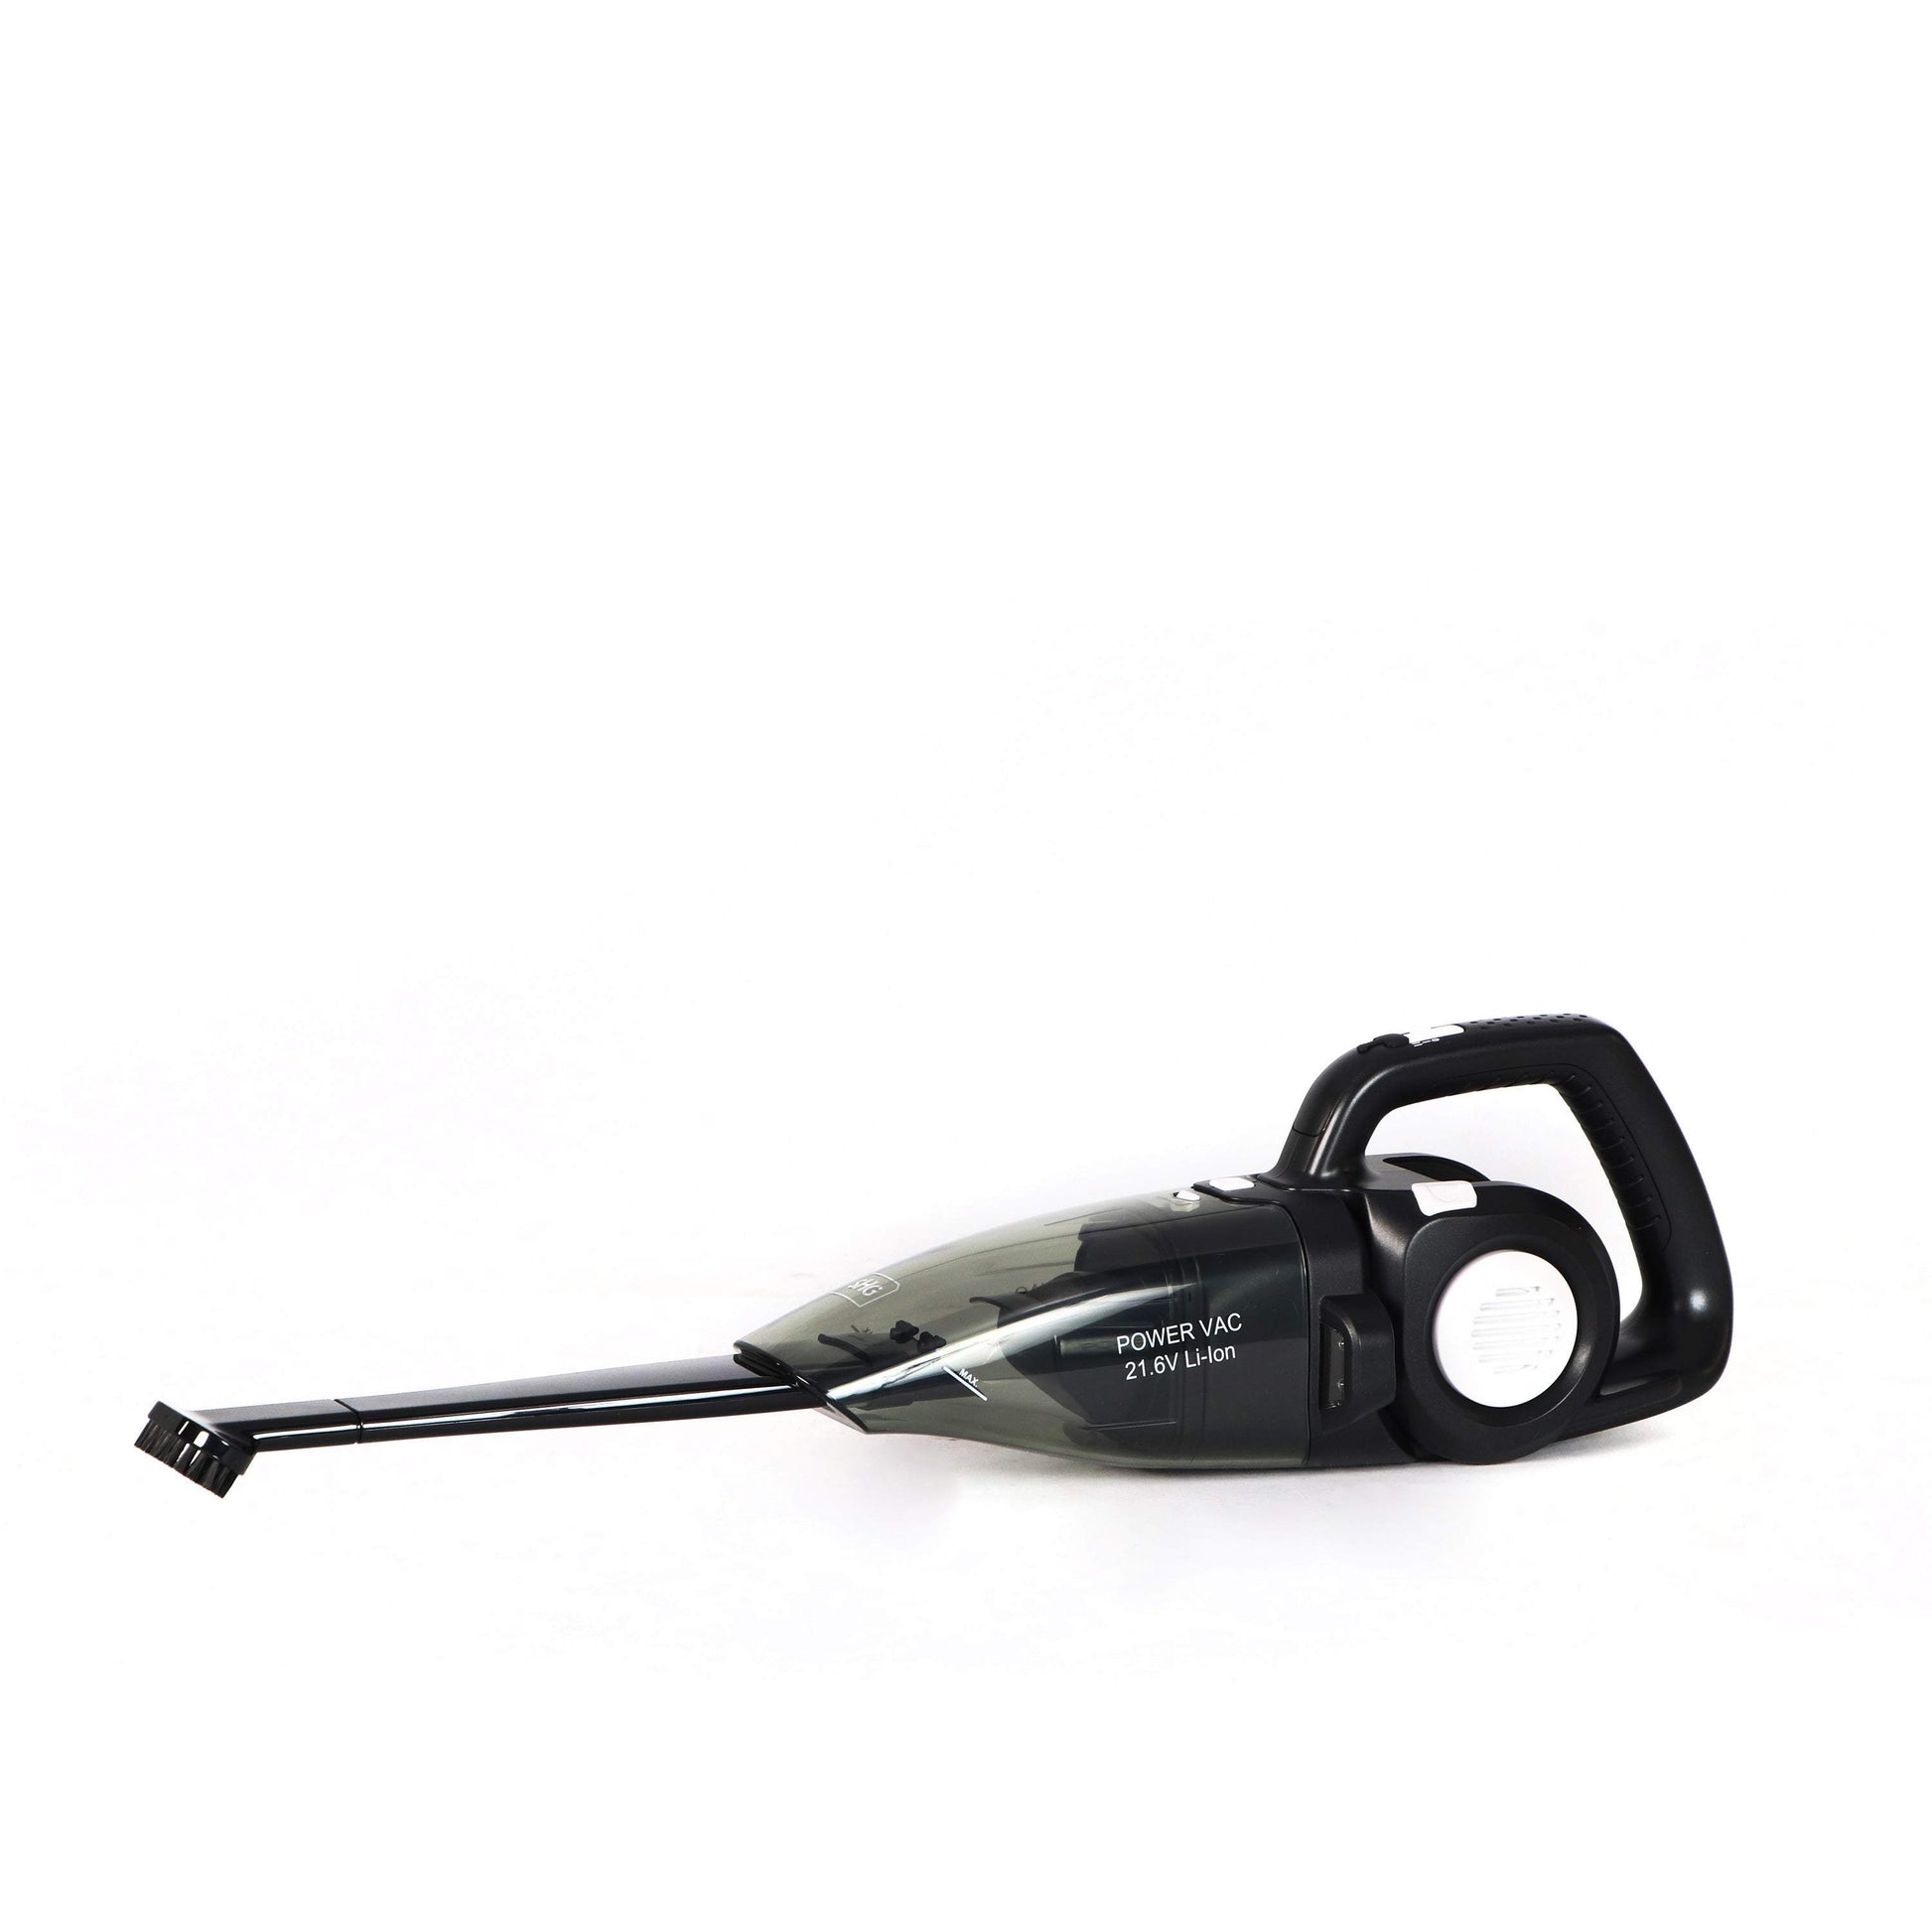 SHG professional cordless hand vacuum cleaner - VC 920-Royal Brands Co-